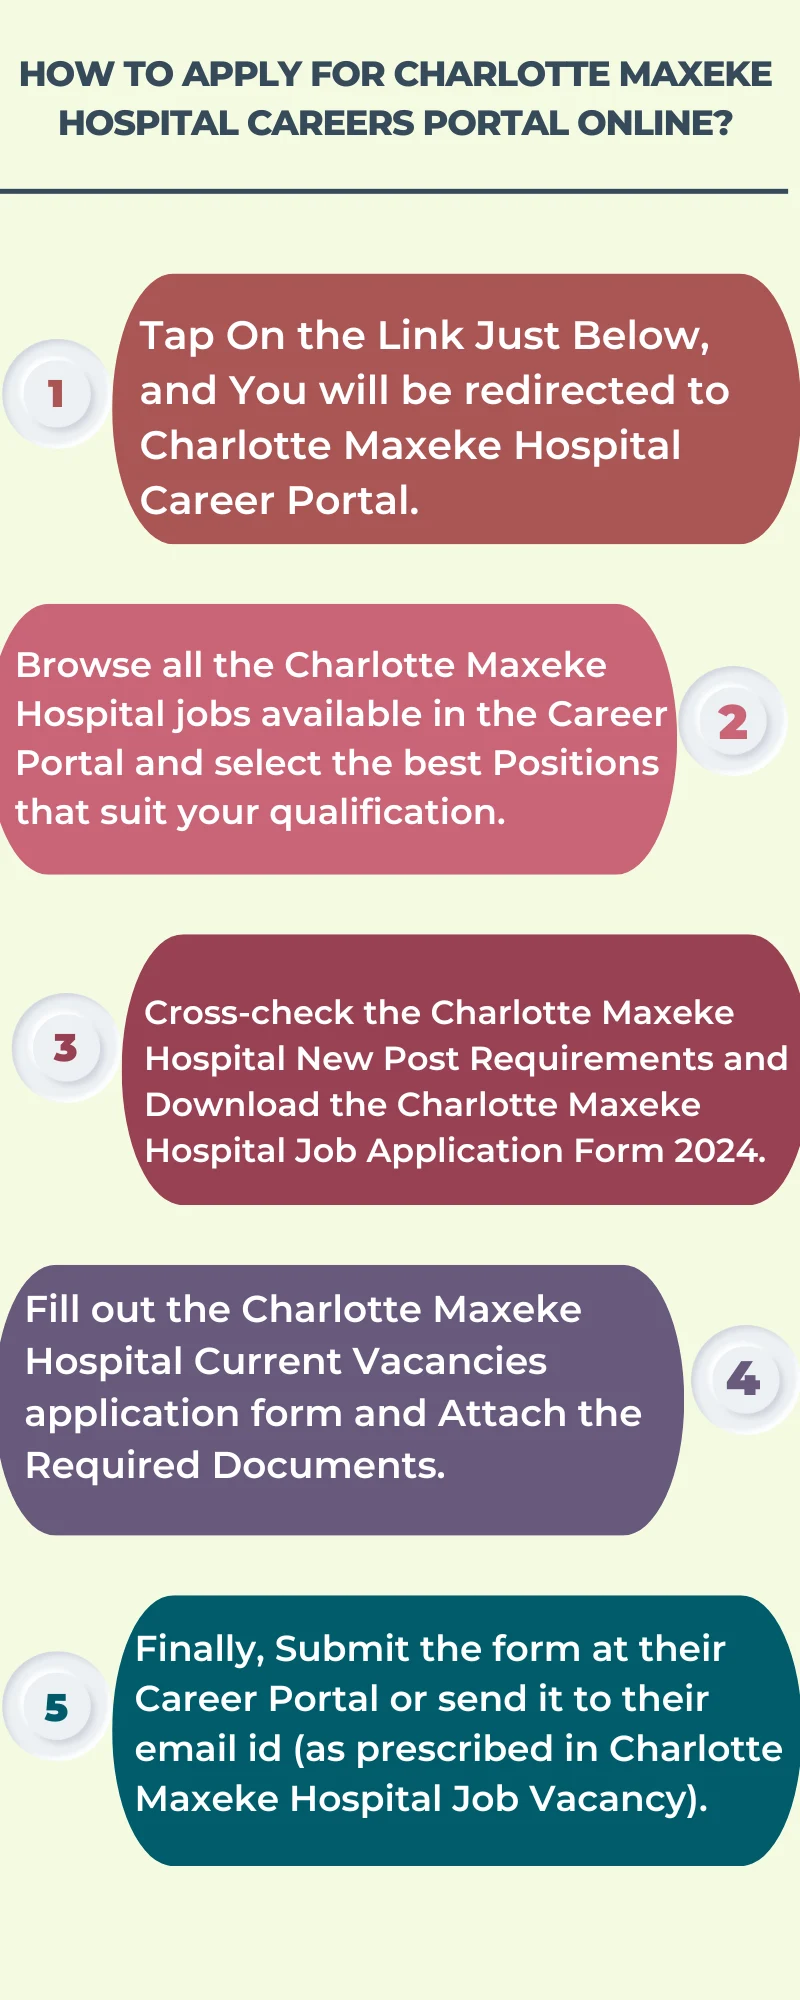 How To Apply for Charlotte Maxeke Hospital Careers Portal Online?